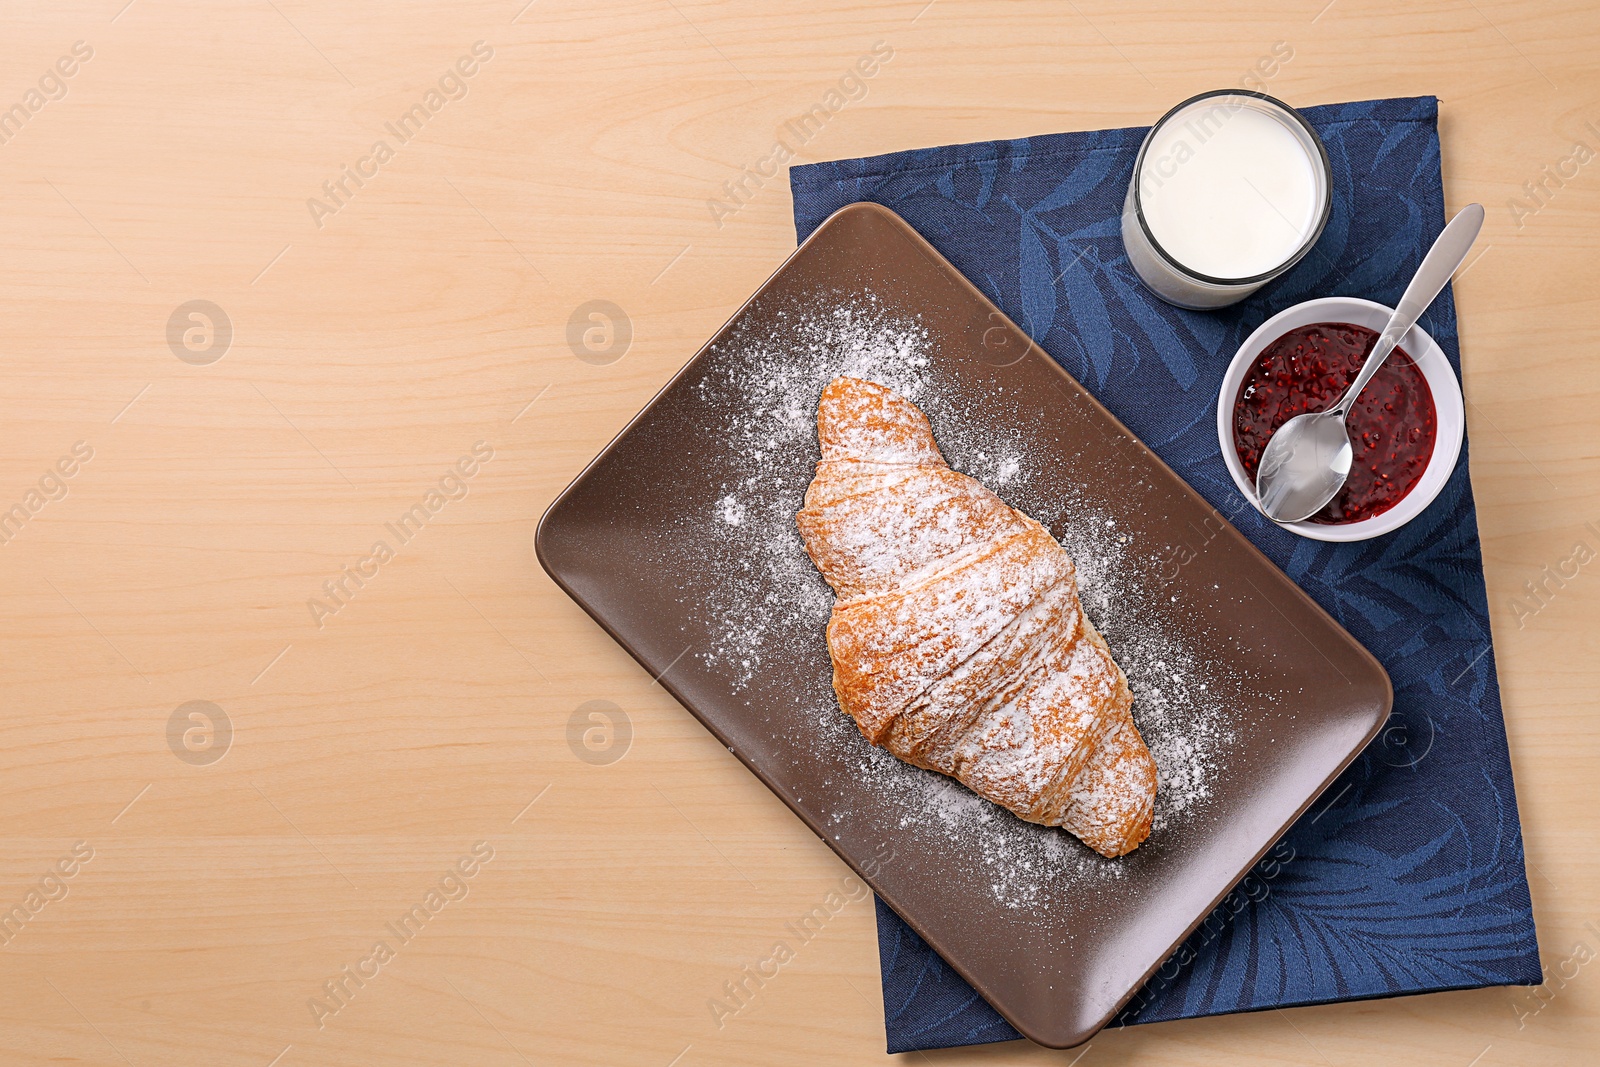 Photo of Plate with tasty croissant, glass of milk and jam on wooden background, top view